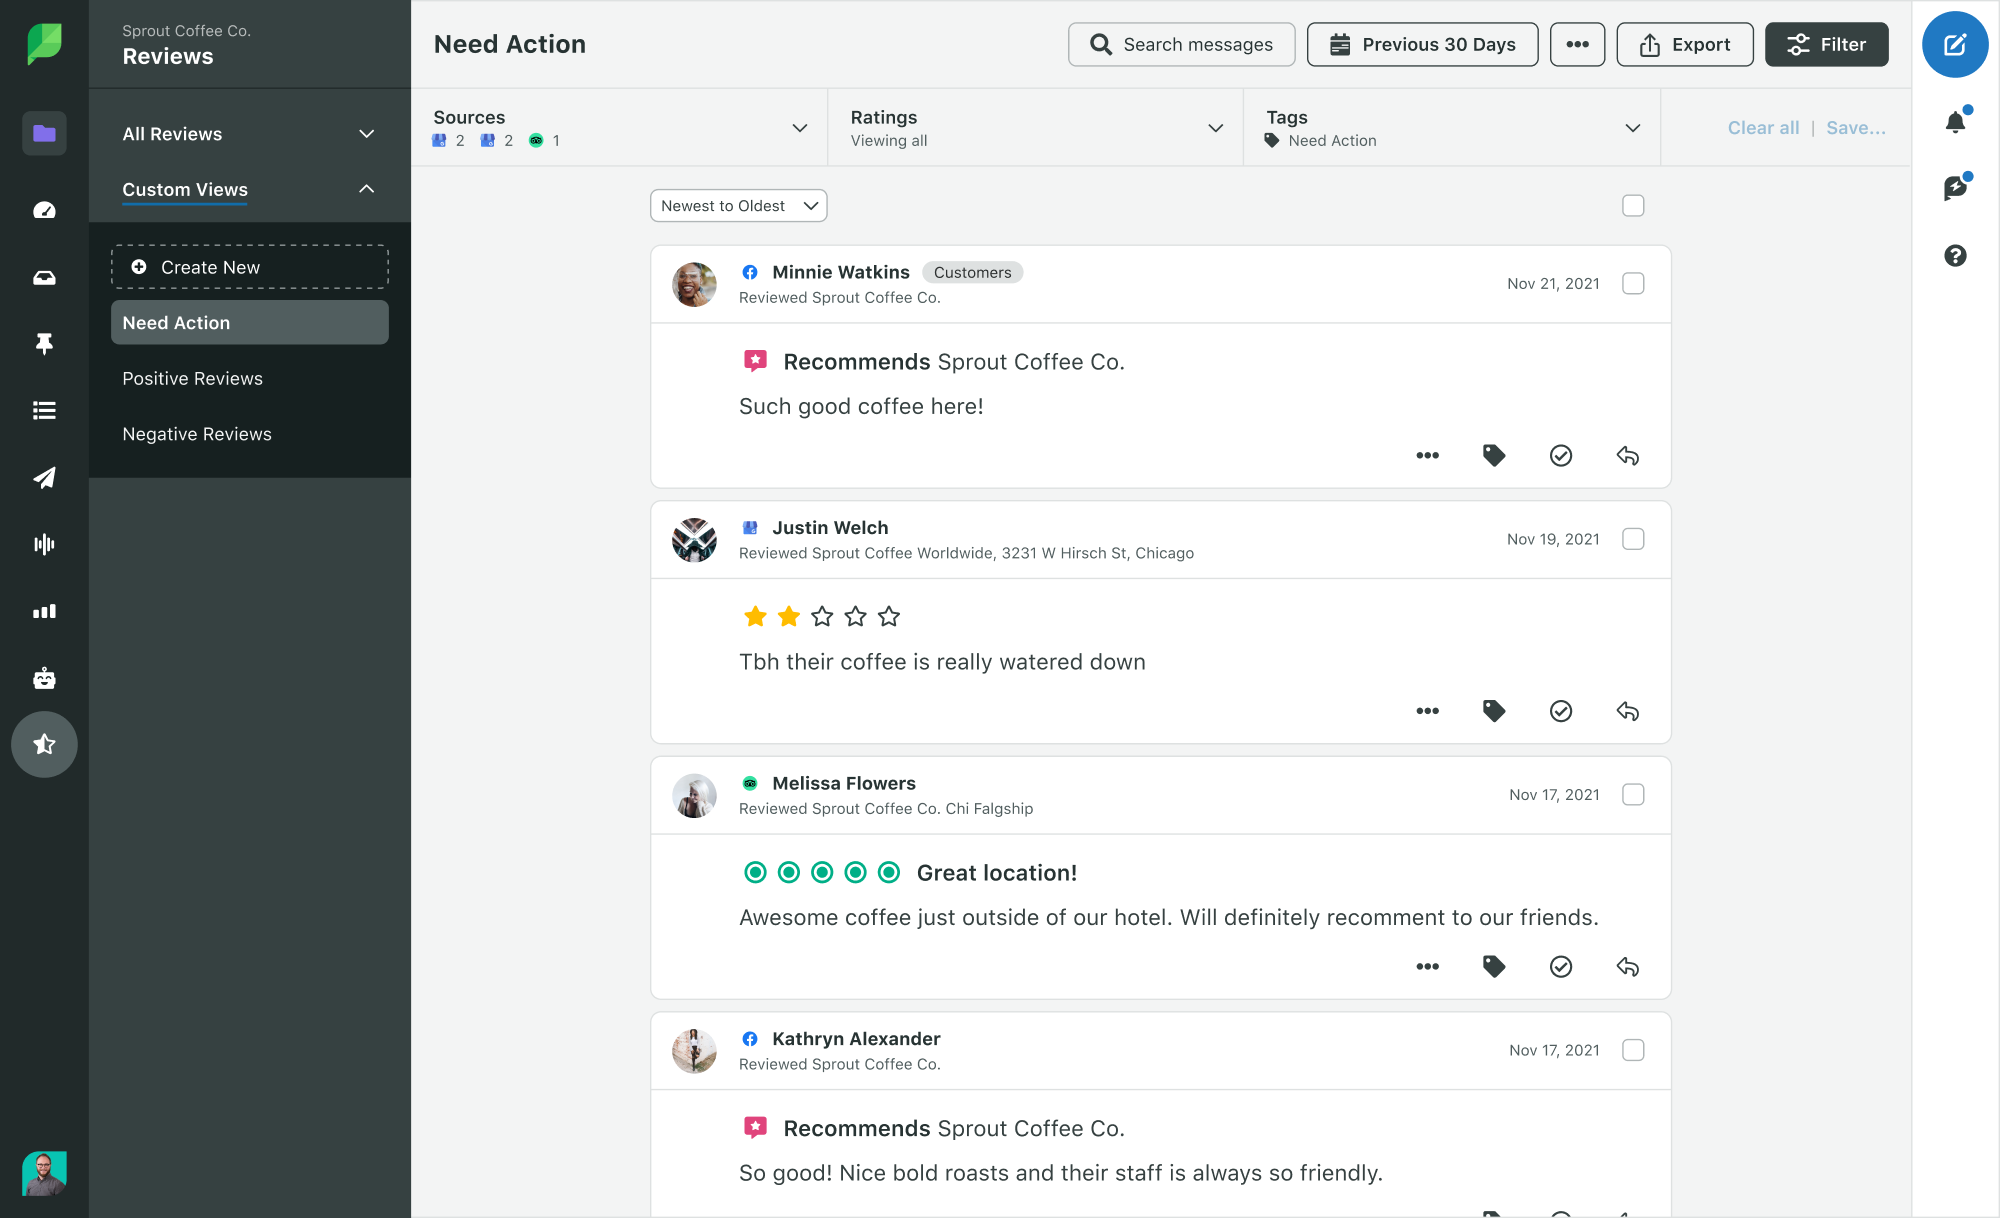 Screenshot of Sprout's review management features